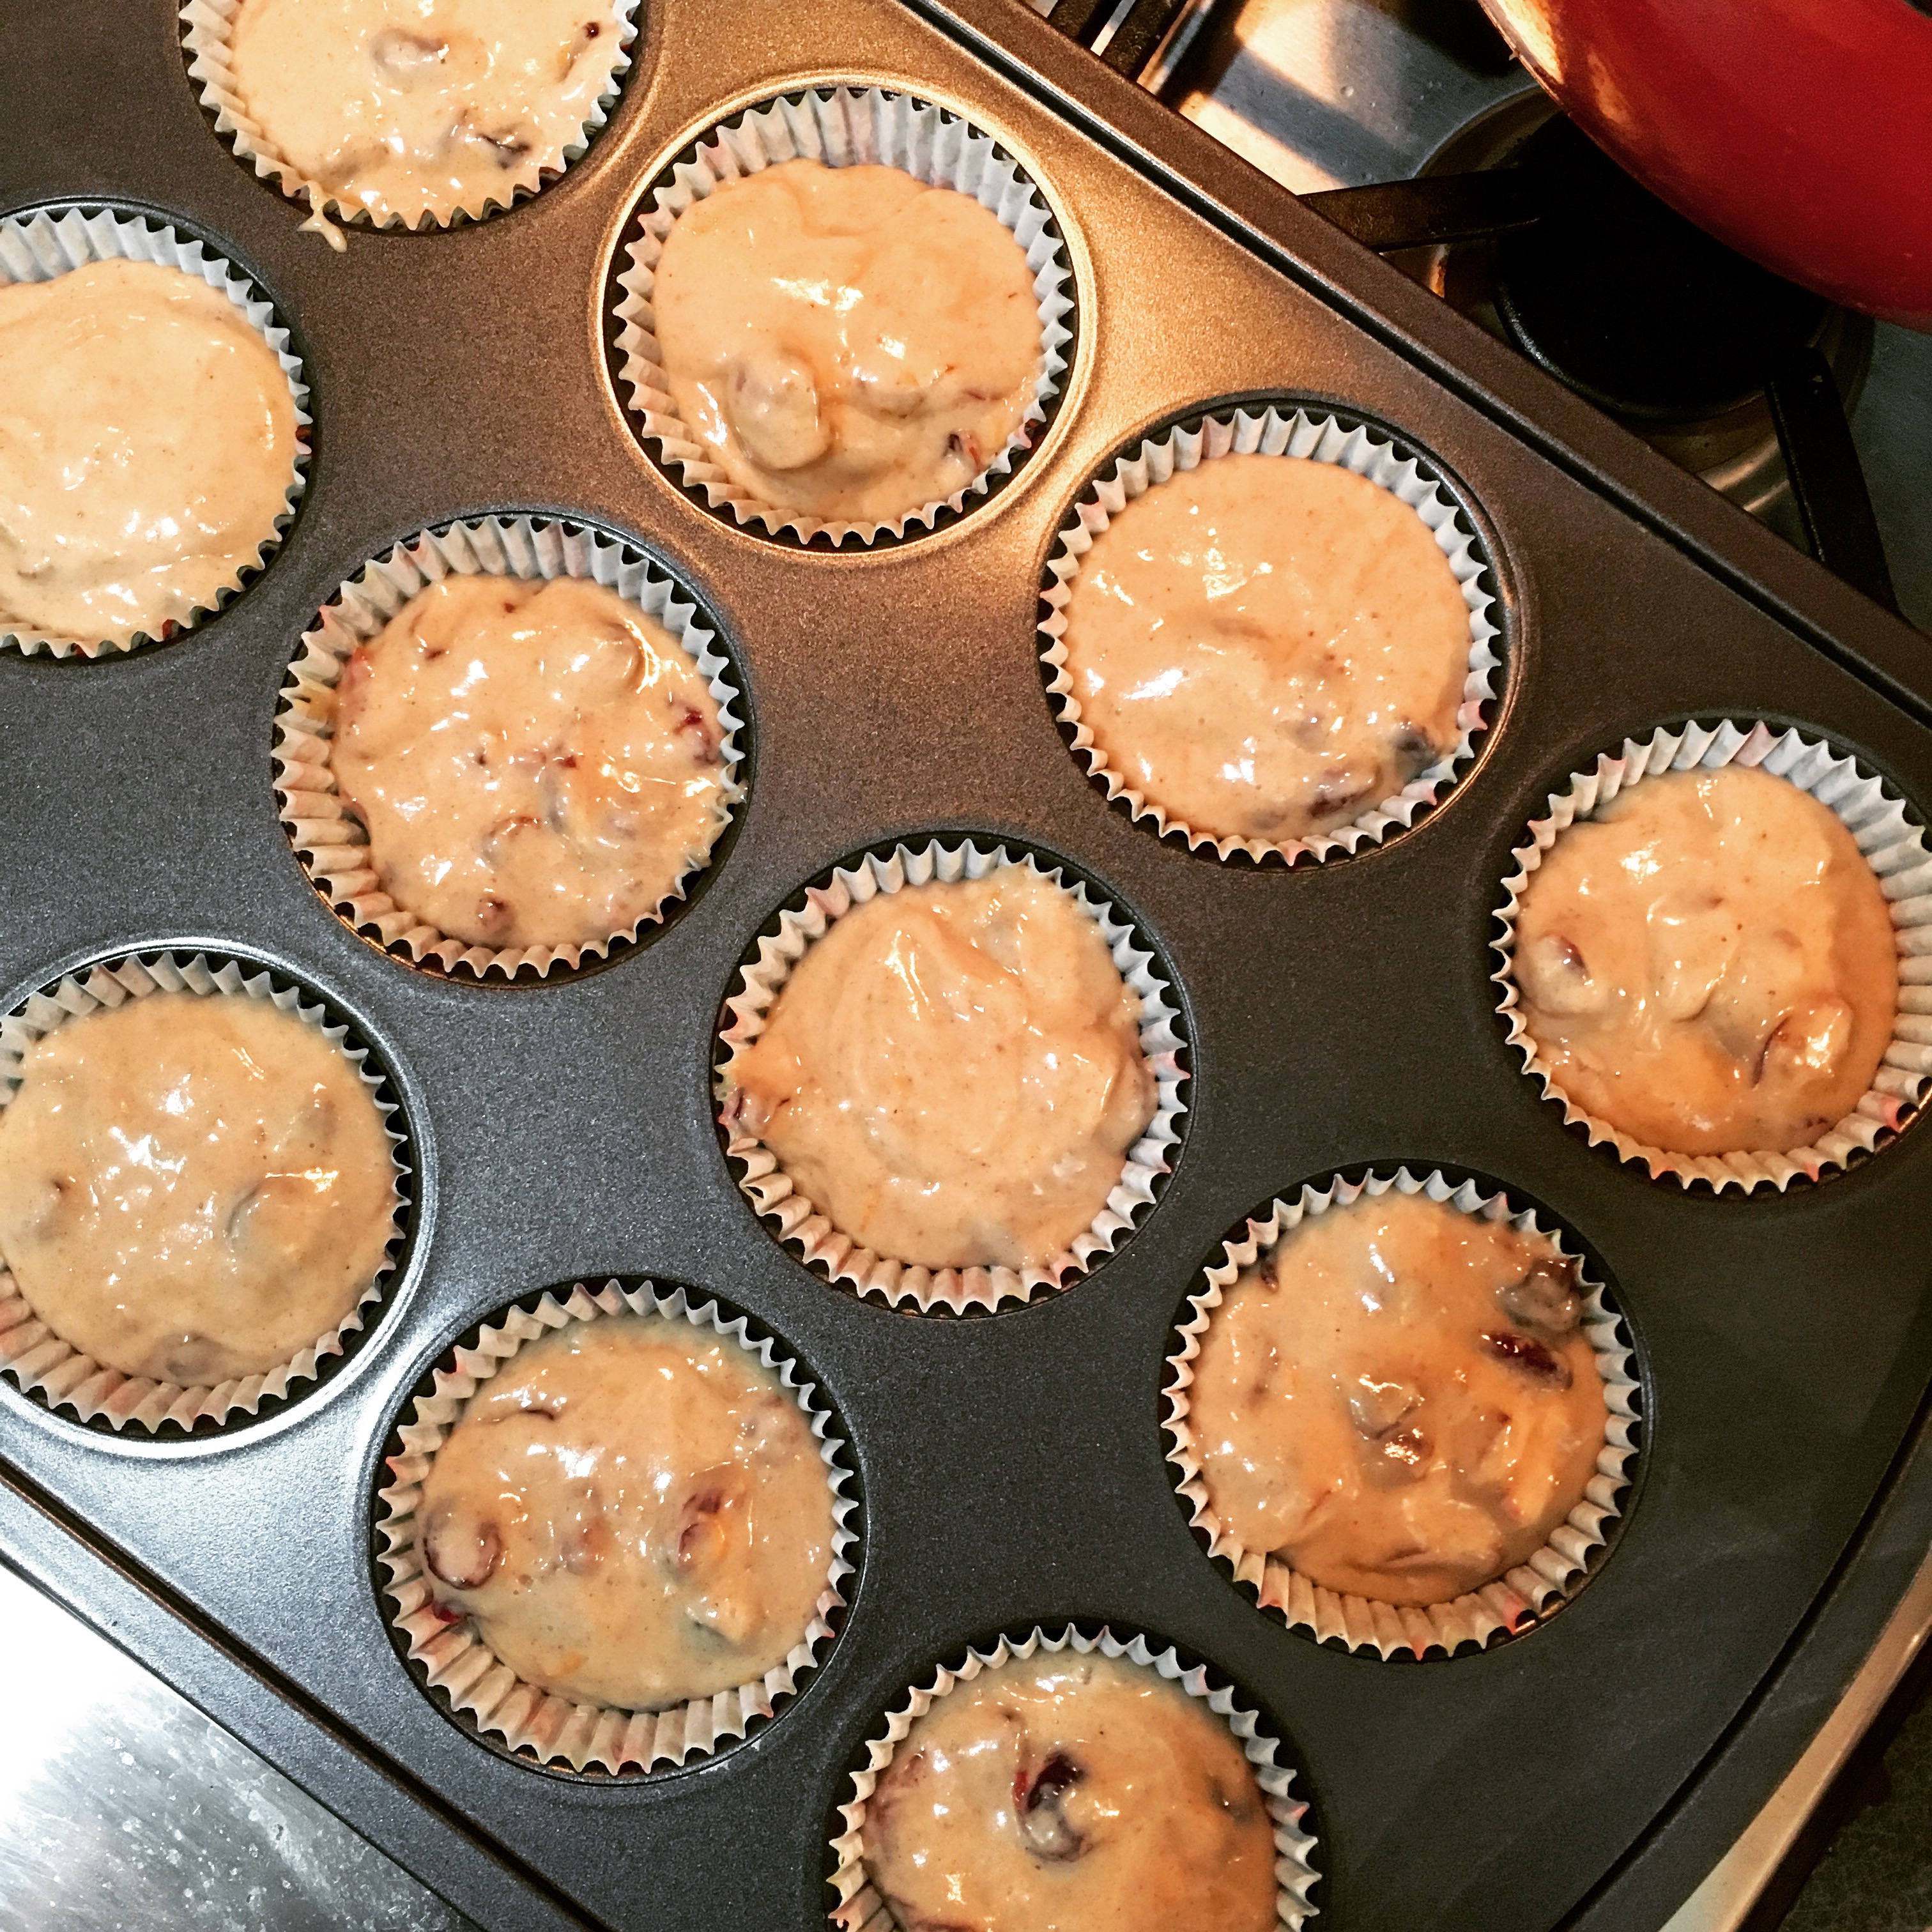 Unbaked Muffins